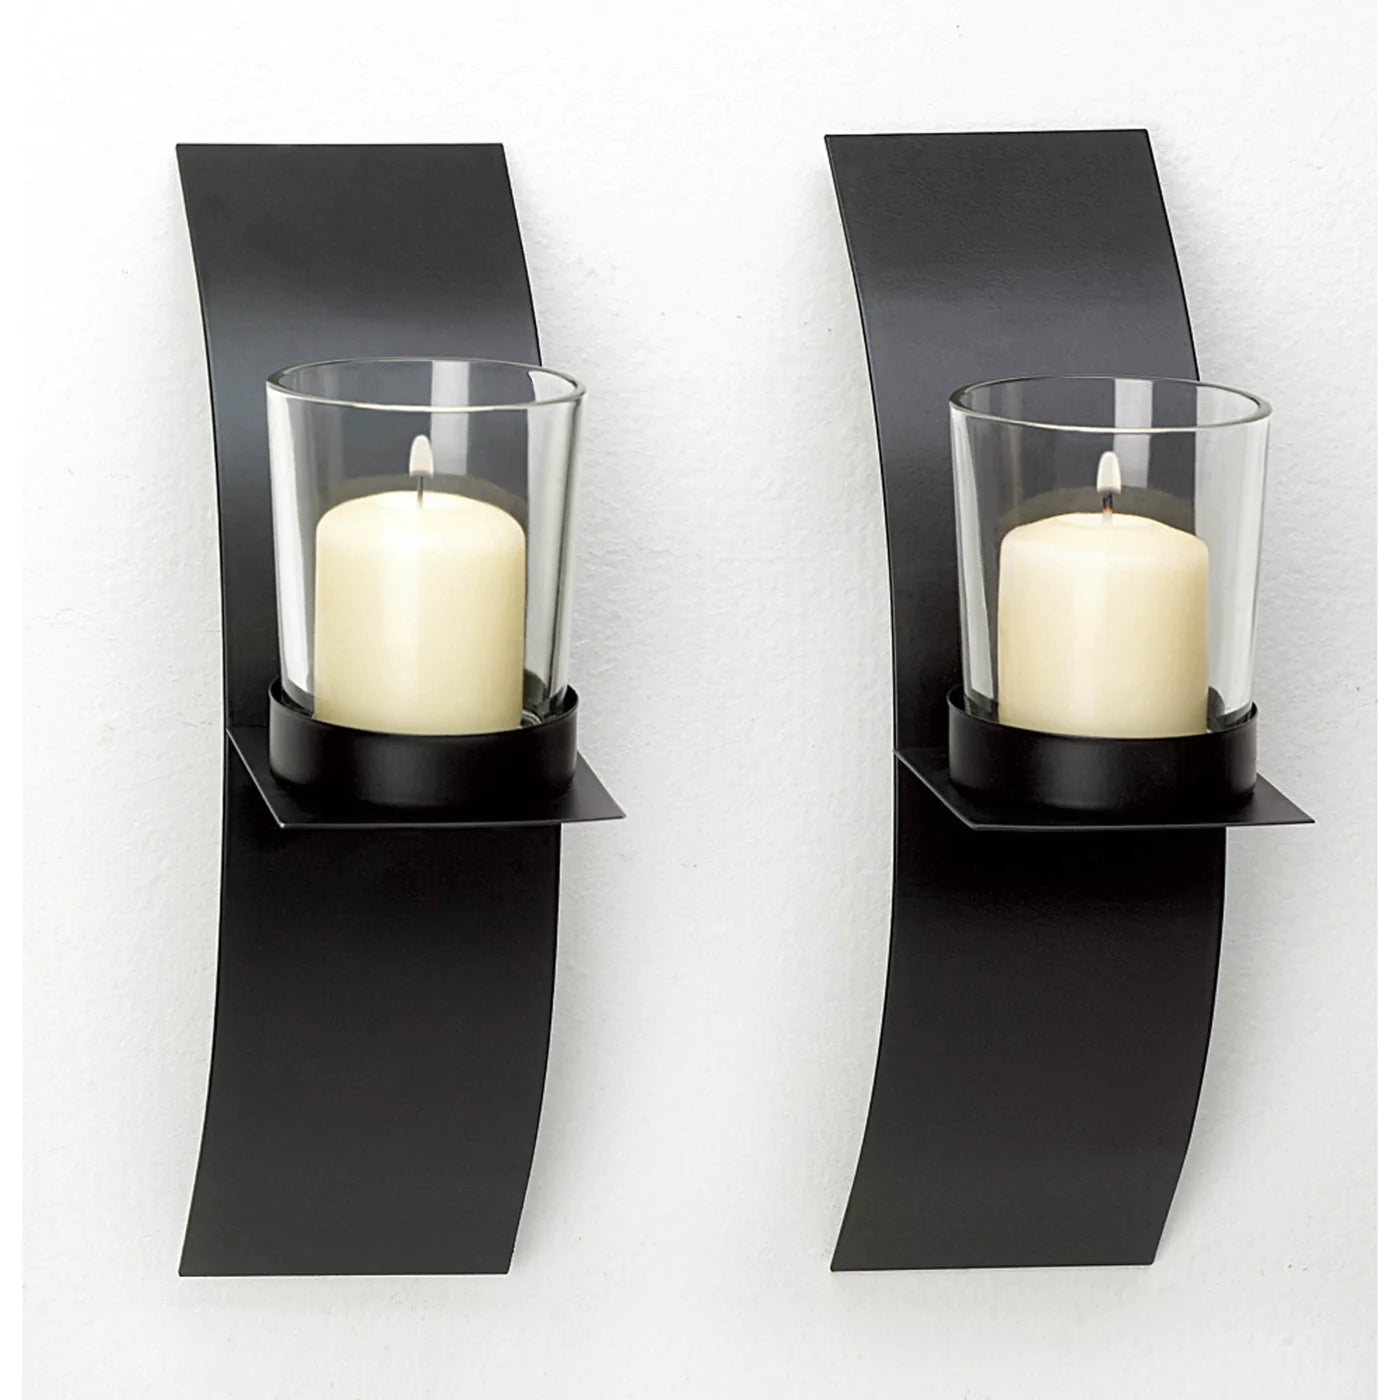 Mod Art Candle Sconce Duo